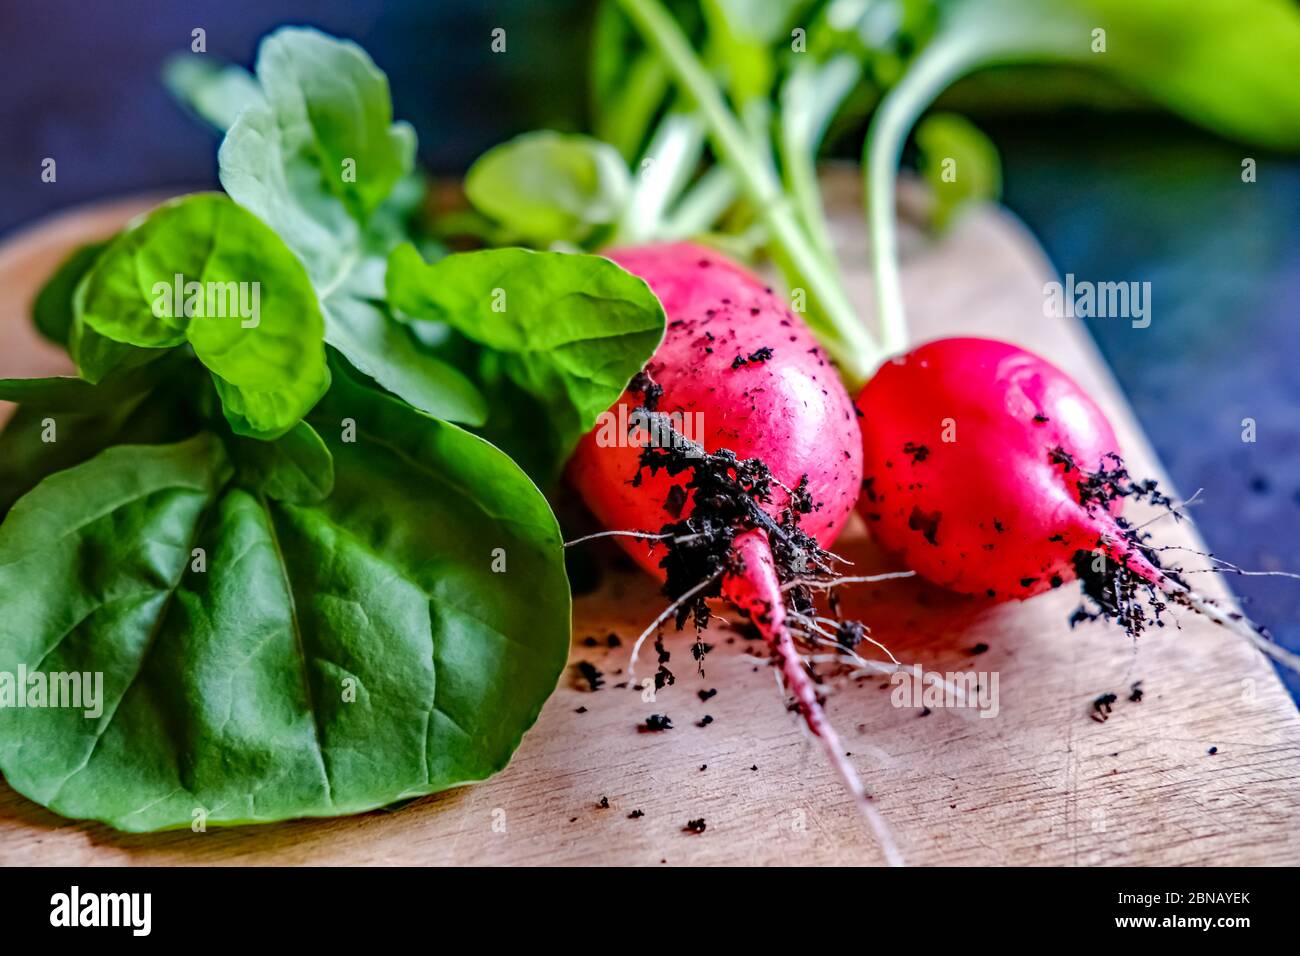 Freshly harvested homegrown radish and spinach leaves on a wooden chopping board with intention shallow depth of field Stock Photo